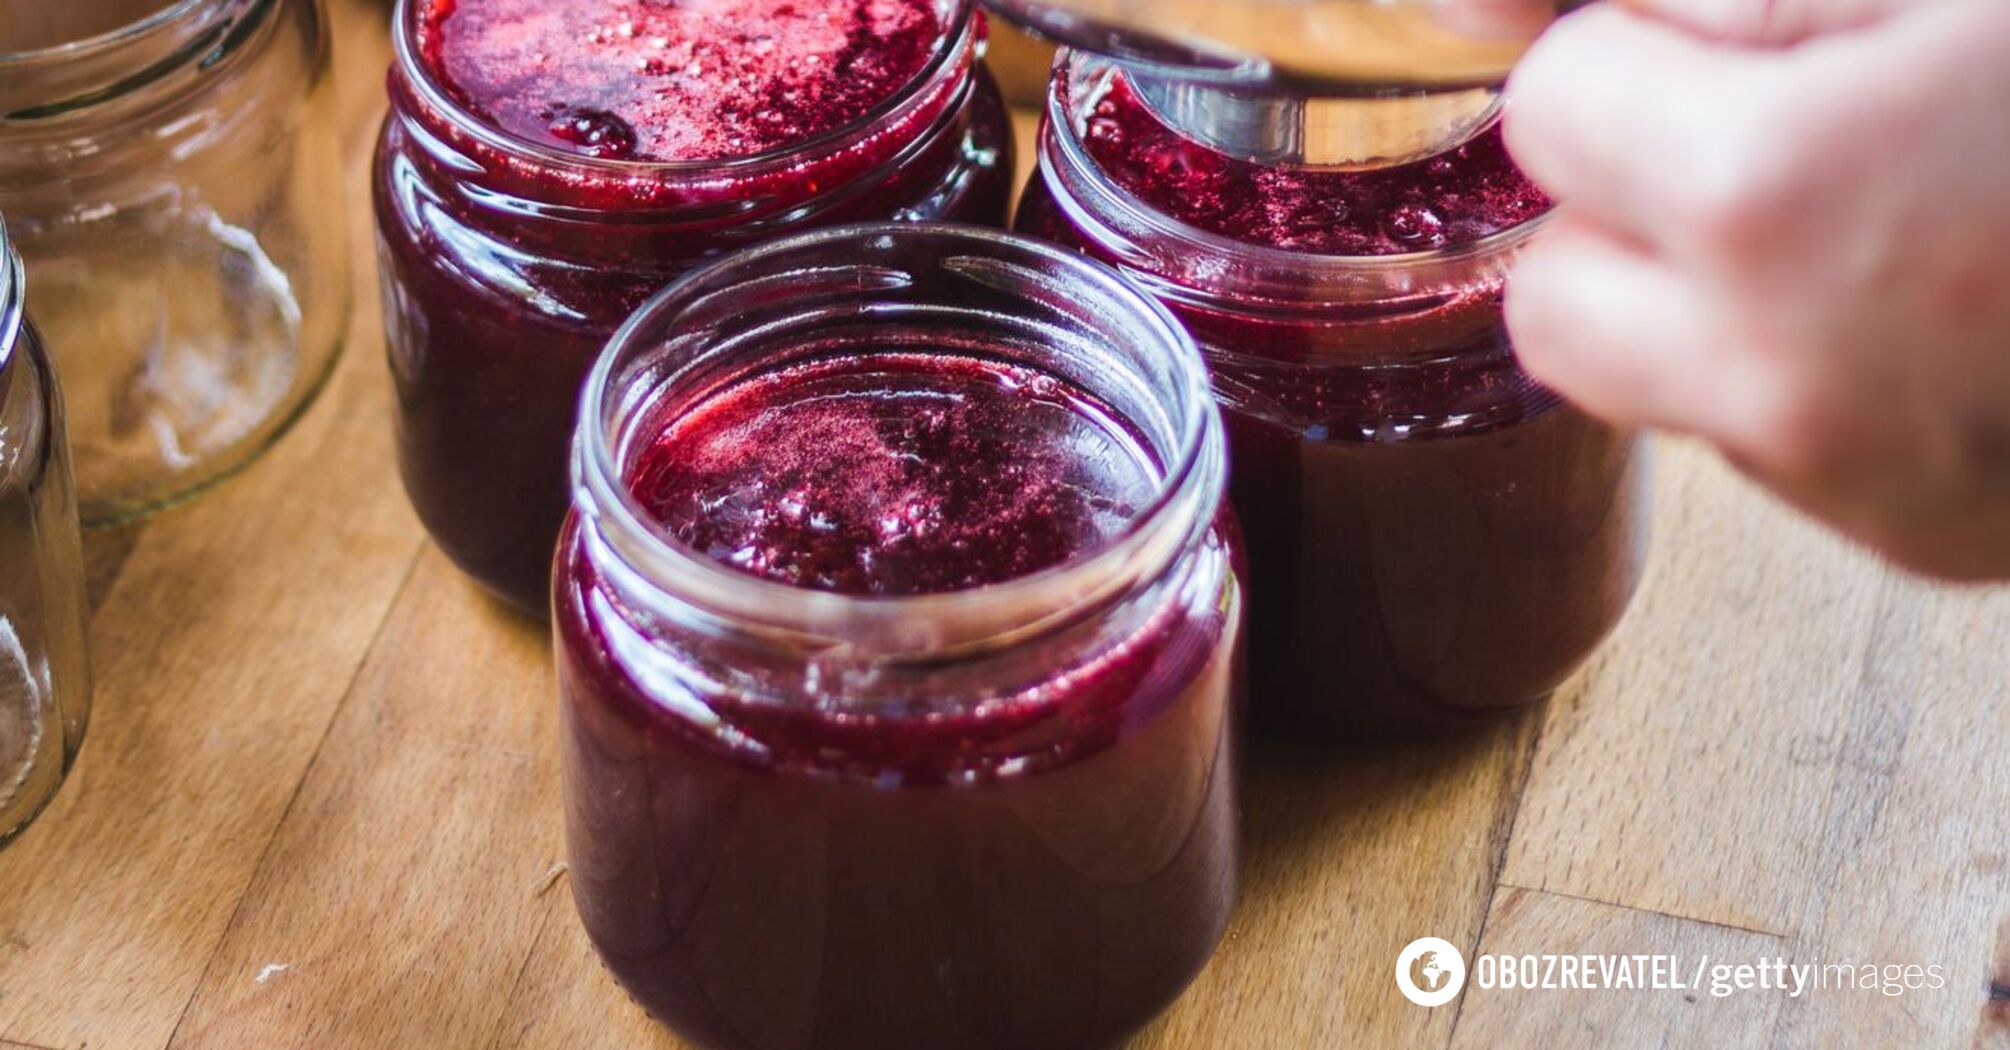 How to make cherries in your own juice at home